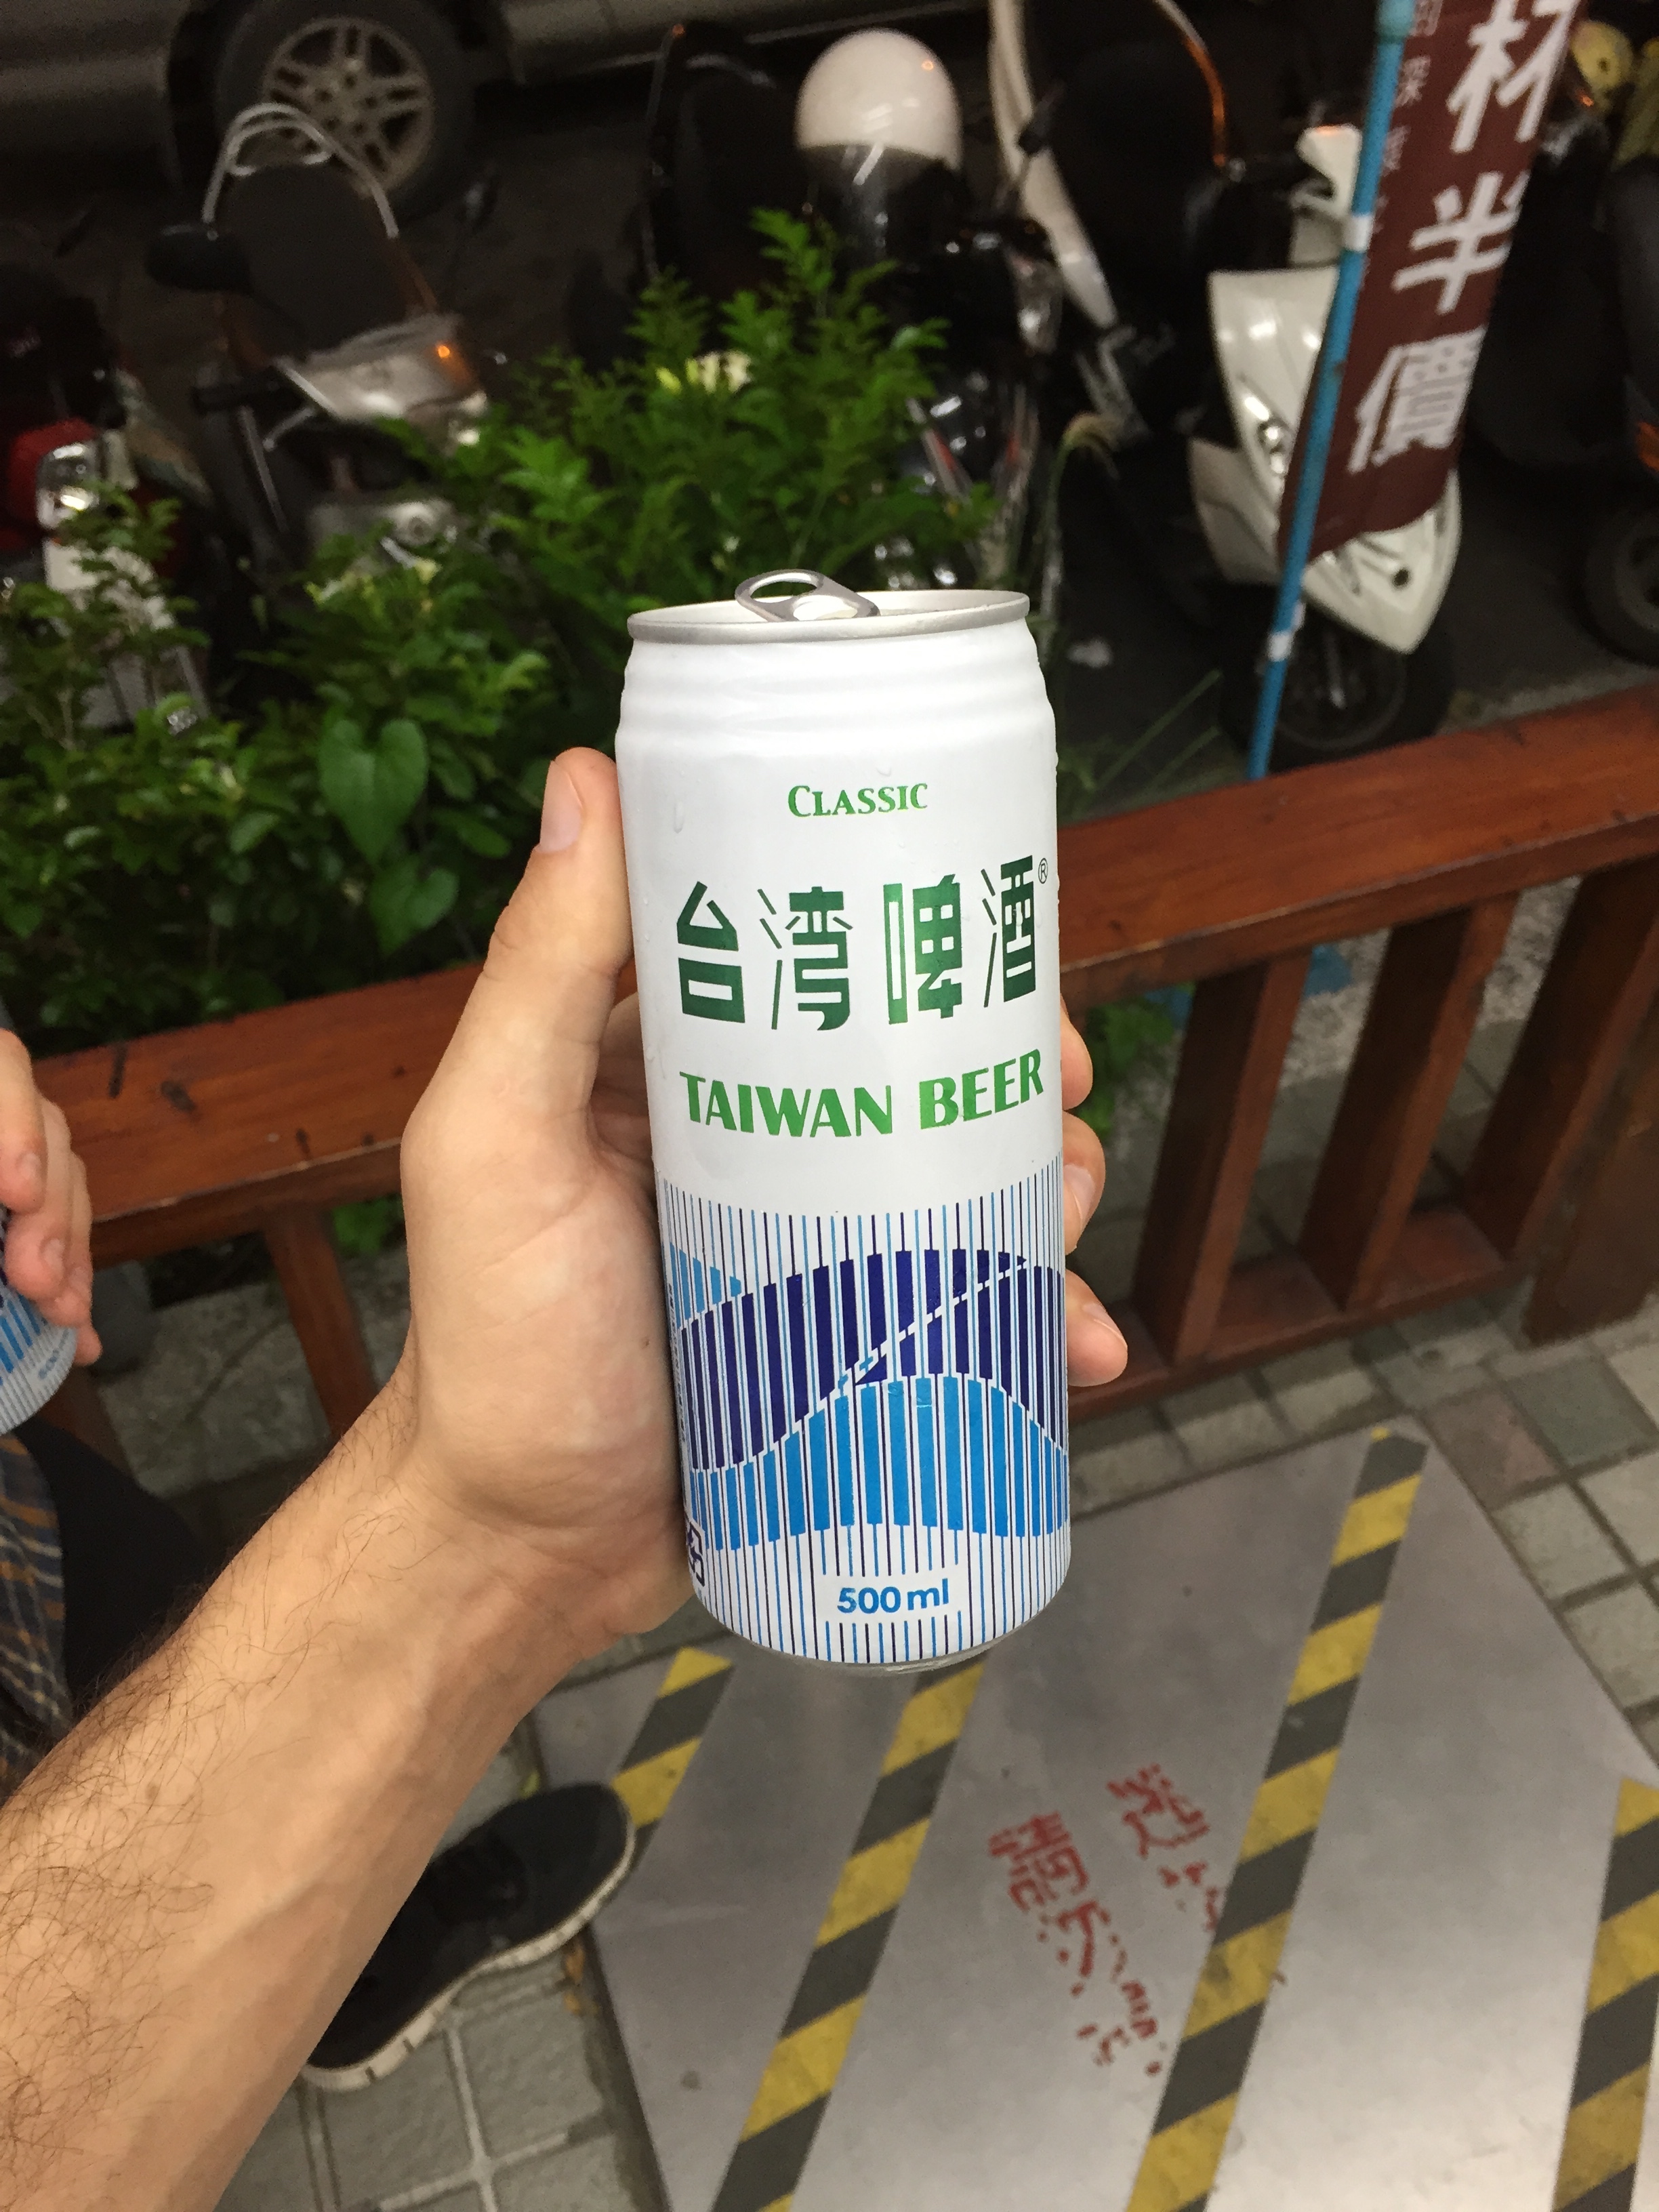  There are no open container laws in Taiwan; I recommend taking advantage. 